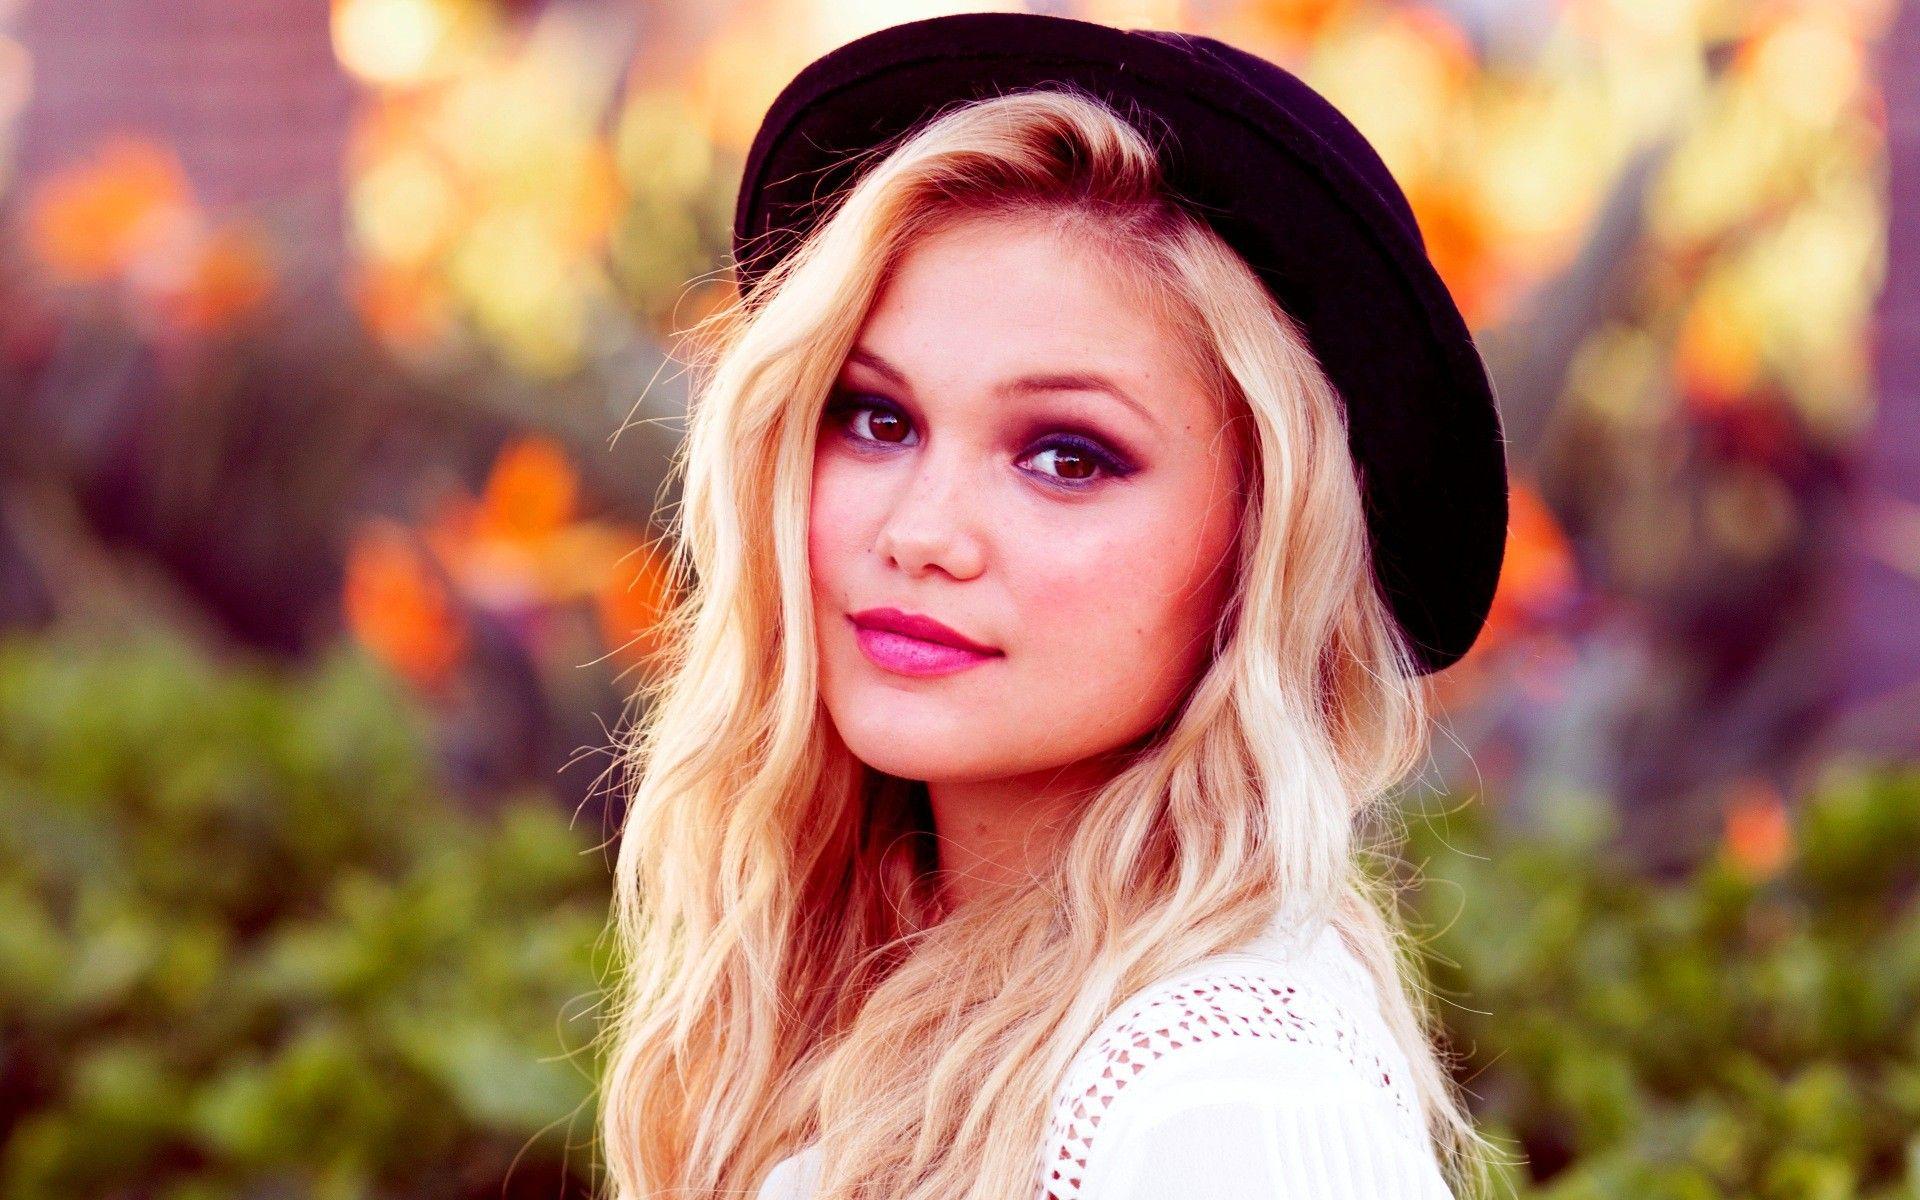 Blonde in a black hat Olivia Holt wallpapers and image.